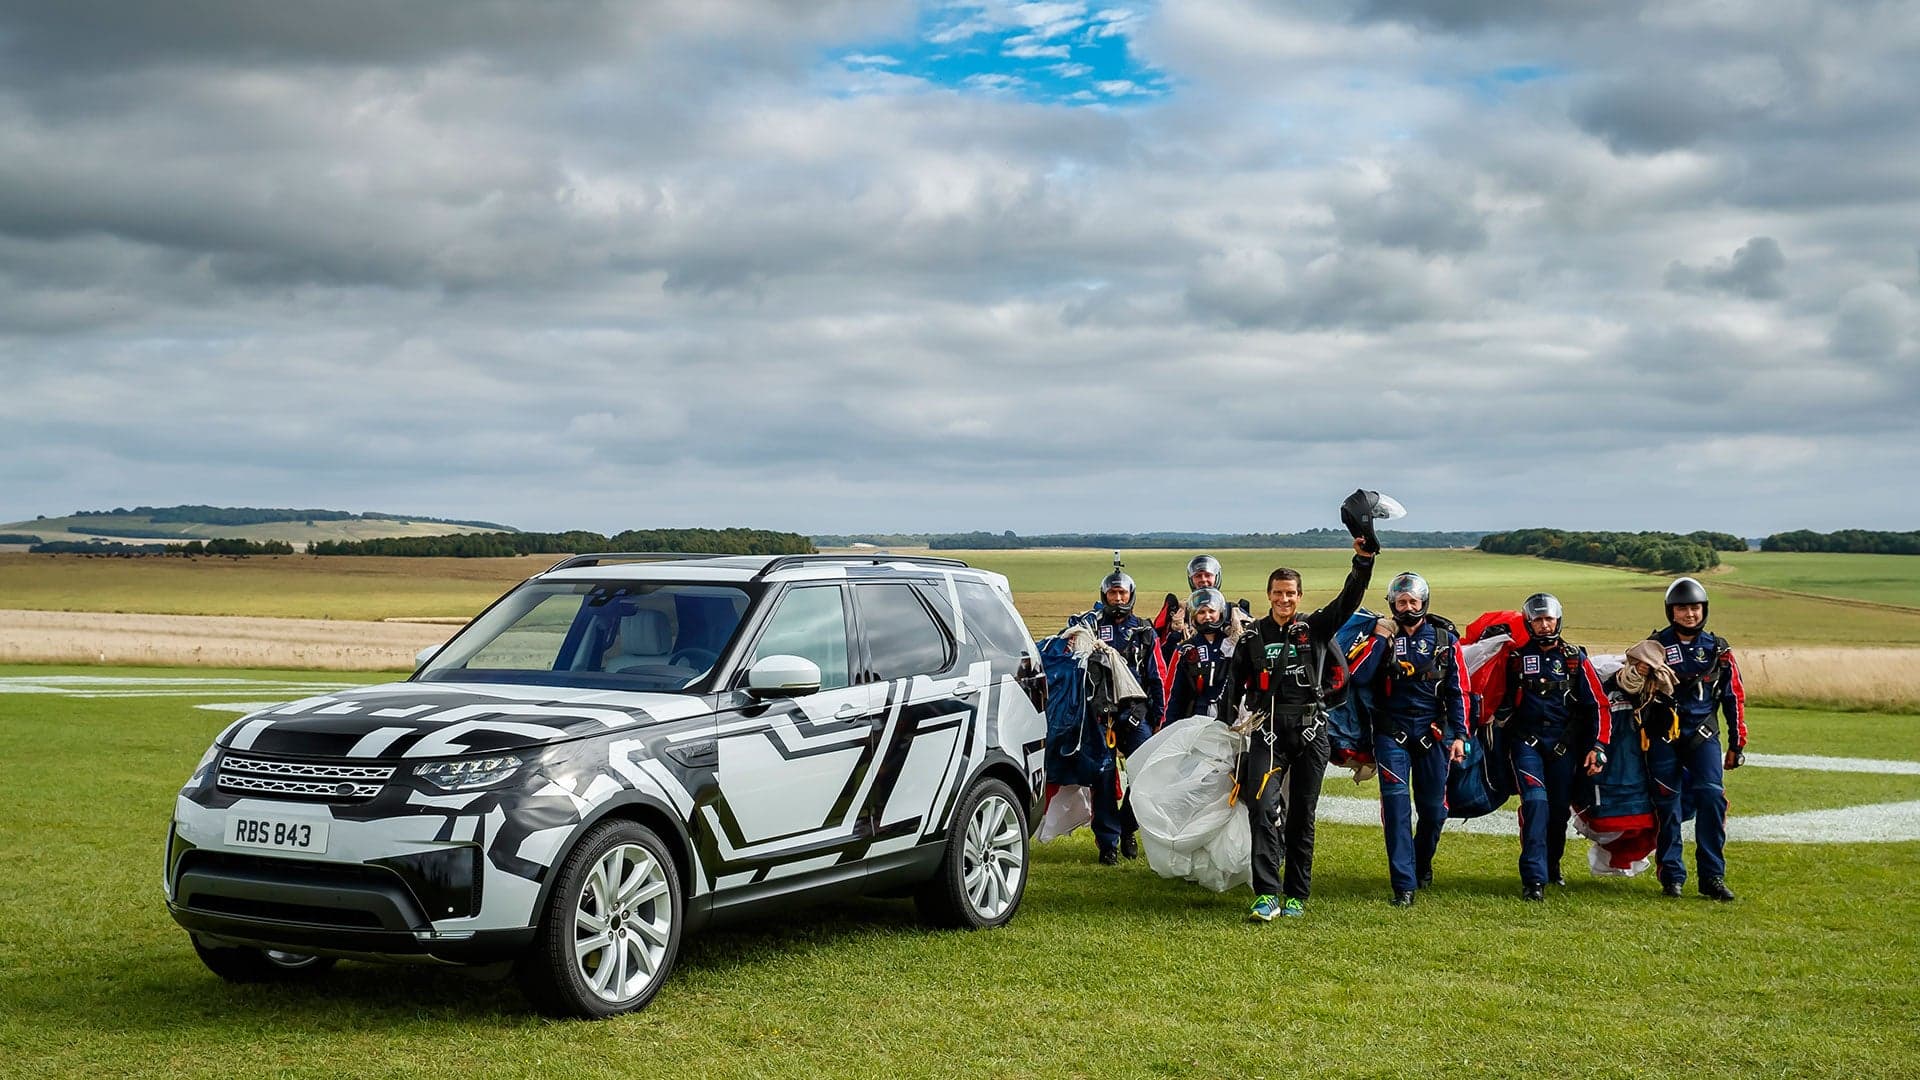 Watch Bear Grylls Skydive to Show Off the New Land Rover Discovery’s Seats